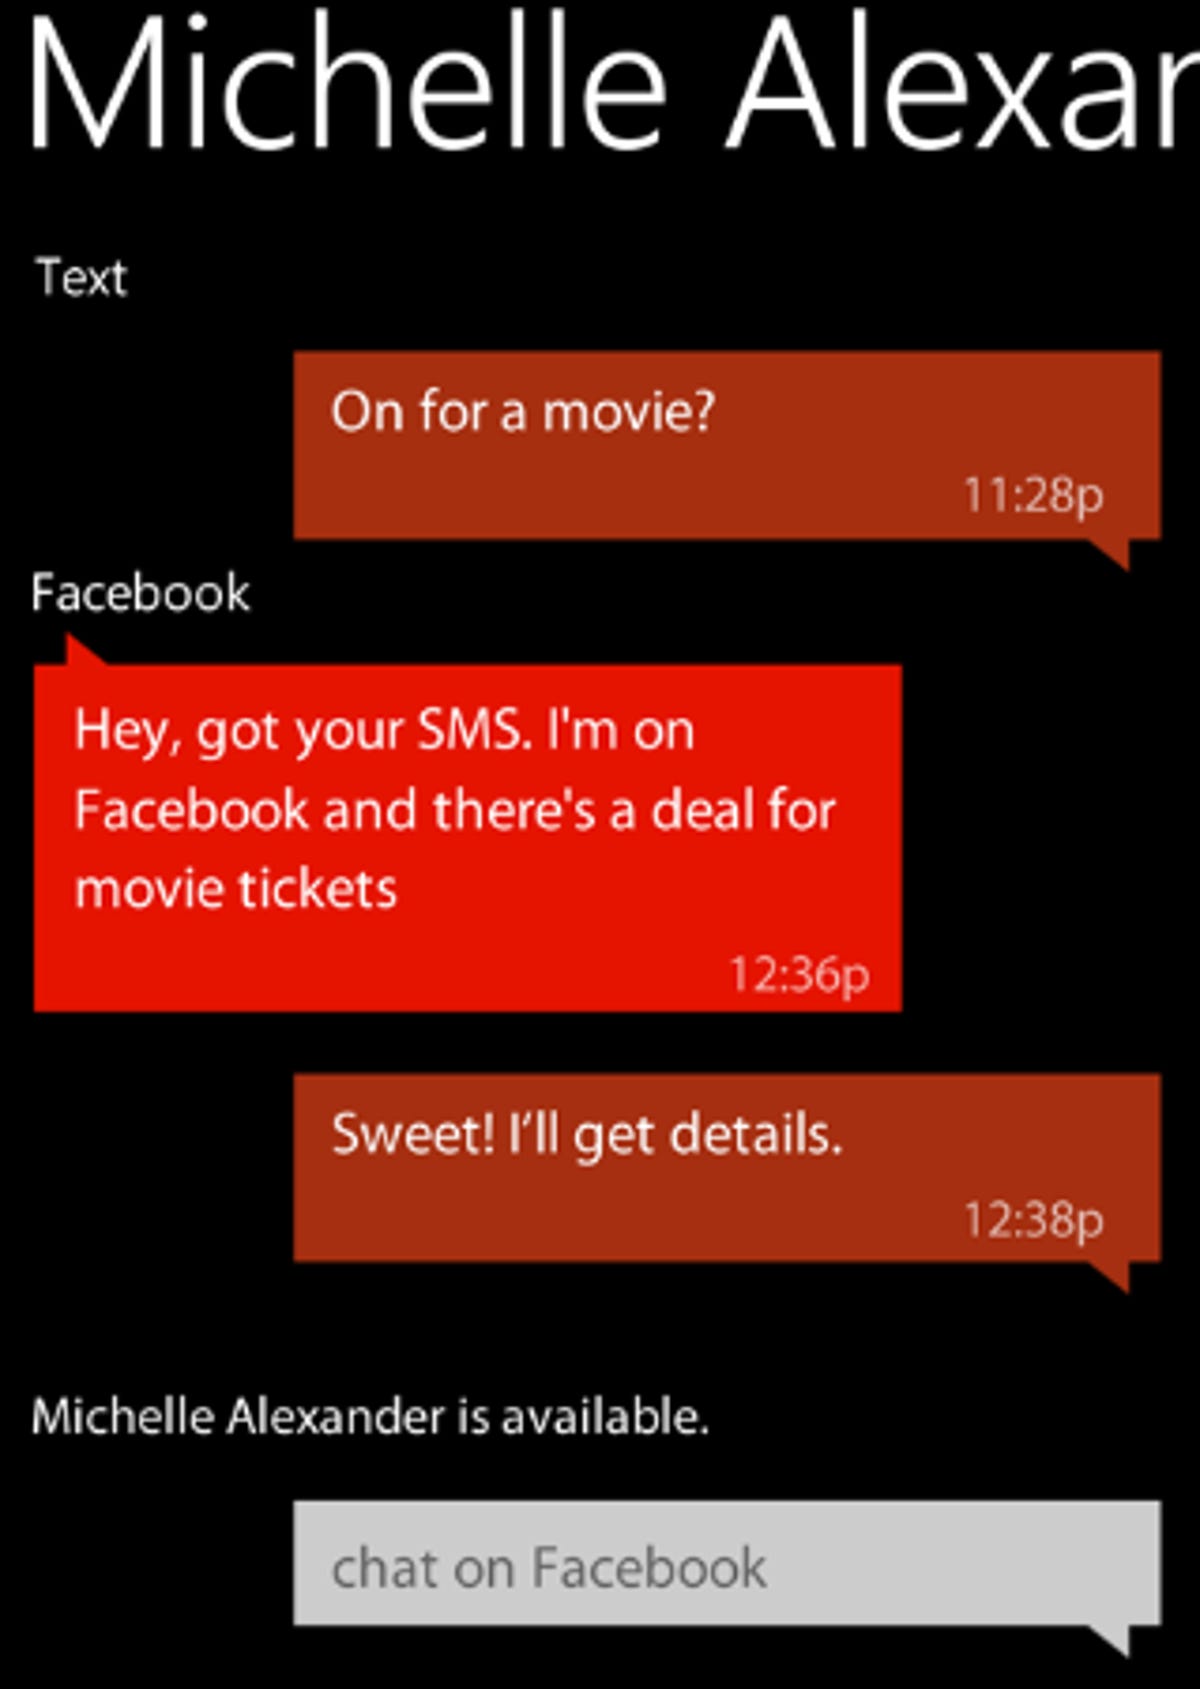 Threaded messages with text, Facebook